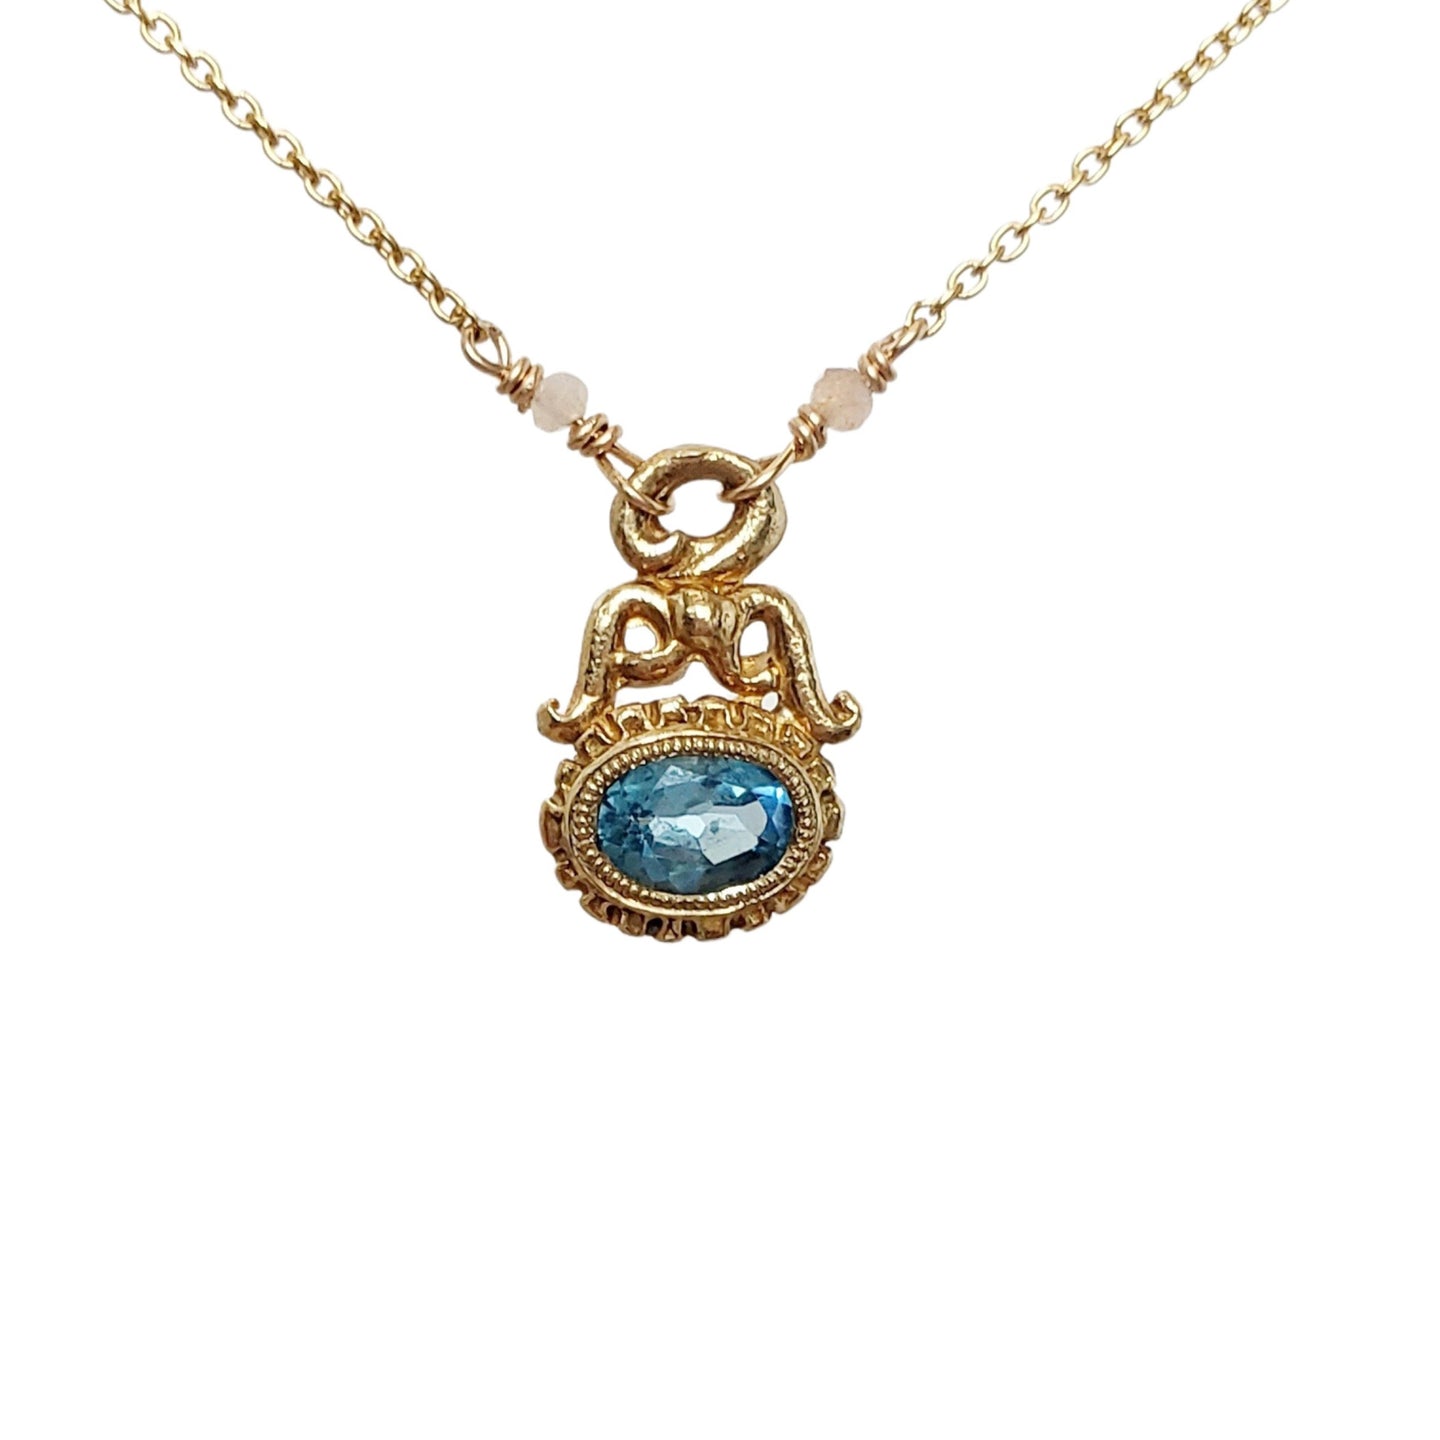 Little Empress Necklace in Bronze, Gold filled Chain and Blue Topaz